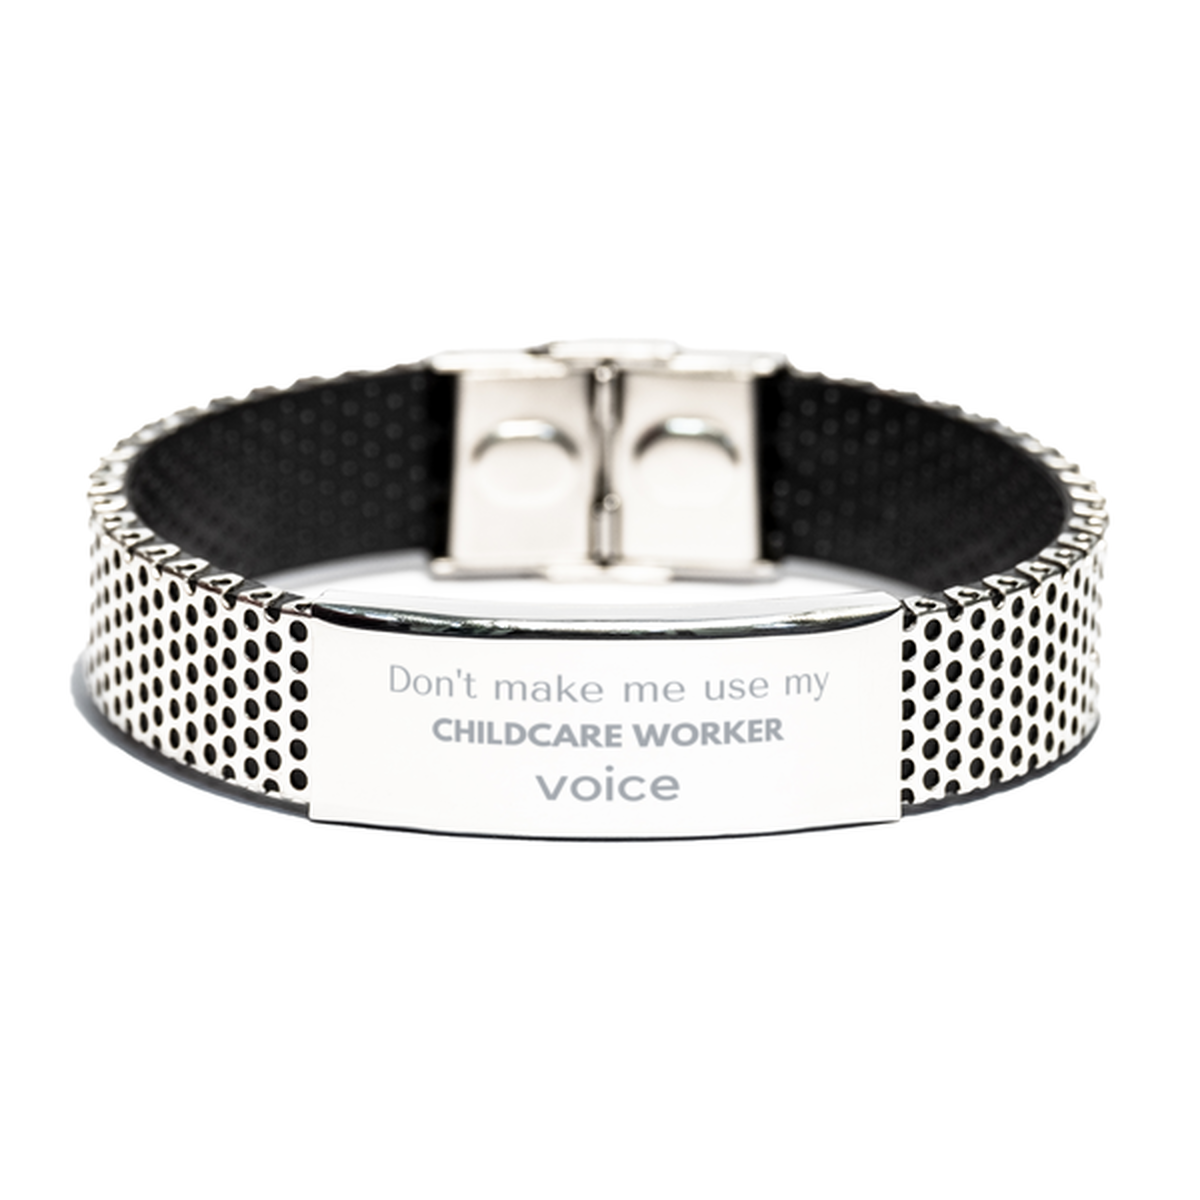 Don't make me use my Childcare Worker voice, Sarcasm Childcare Worker Gifts, Christmas Childcare Worker Stainless Steel Bracelet Birthday Unique Gifts For Childcare Worker Coworkers, Men, Women, Colleague, Friends